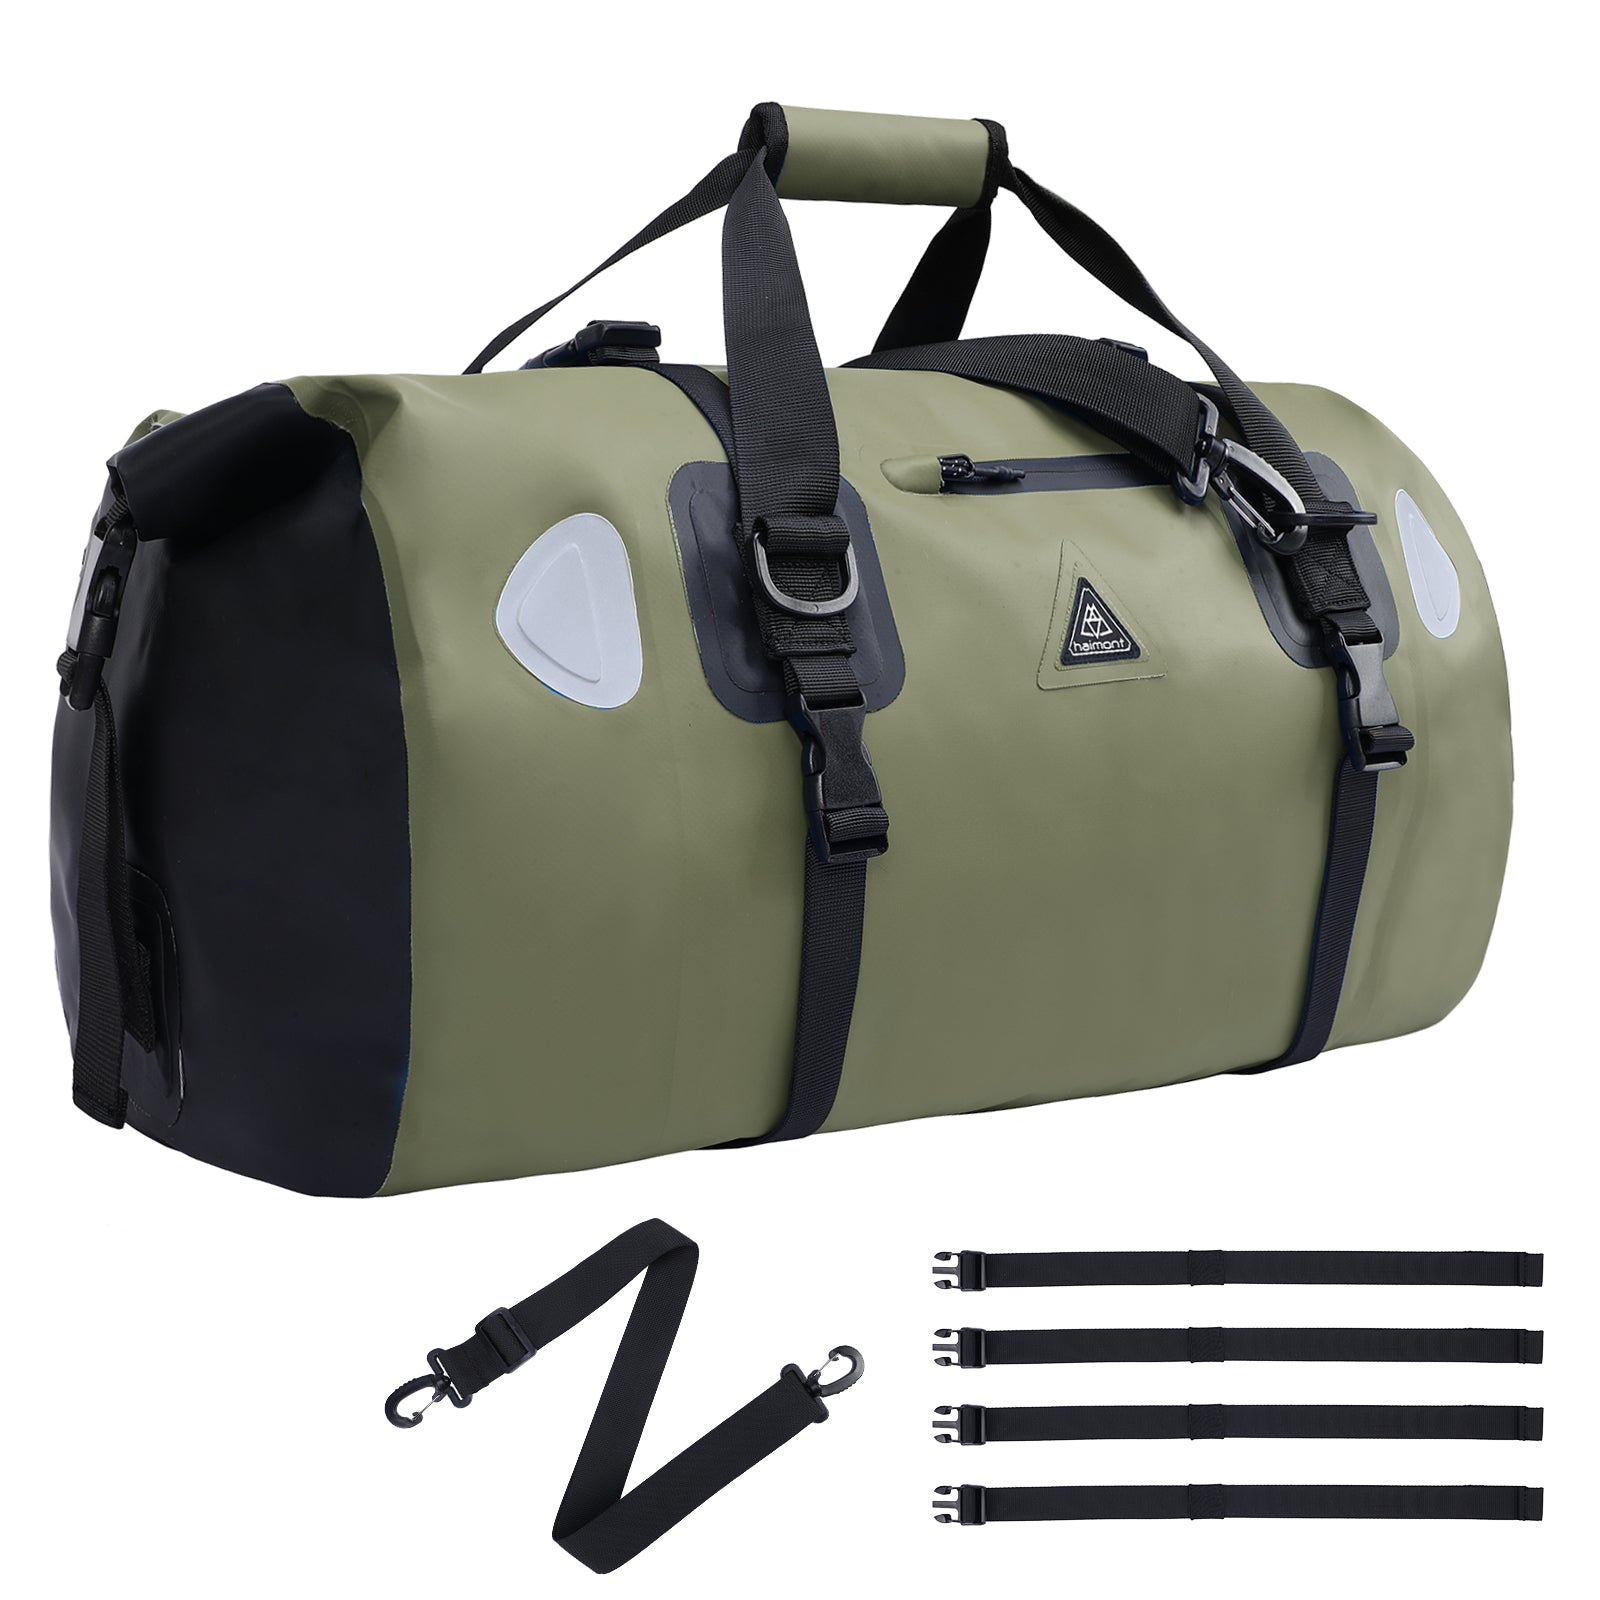 Ozark Trail 90L Packable All-Weather Duffel Bag with Convertible Backpack Straps, Black, Adult Unisex, Size: 90 Liters